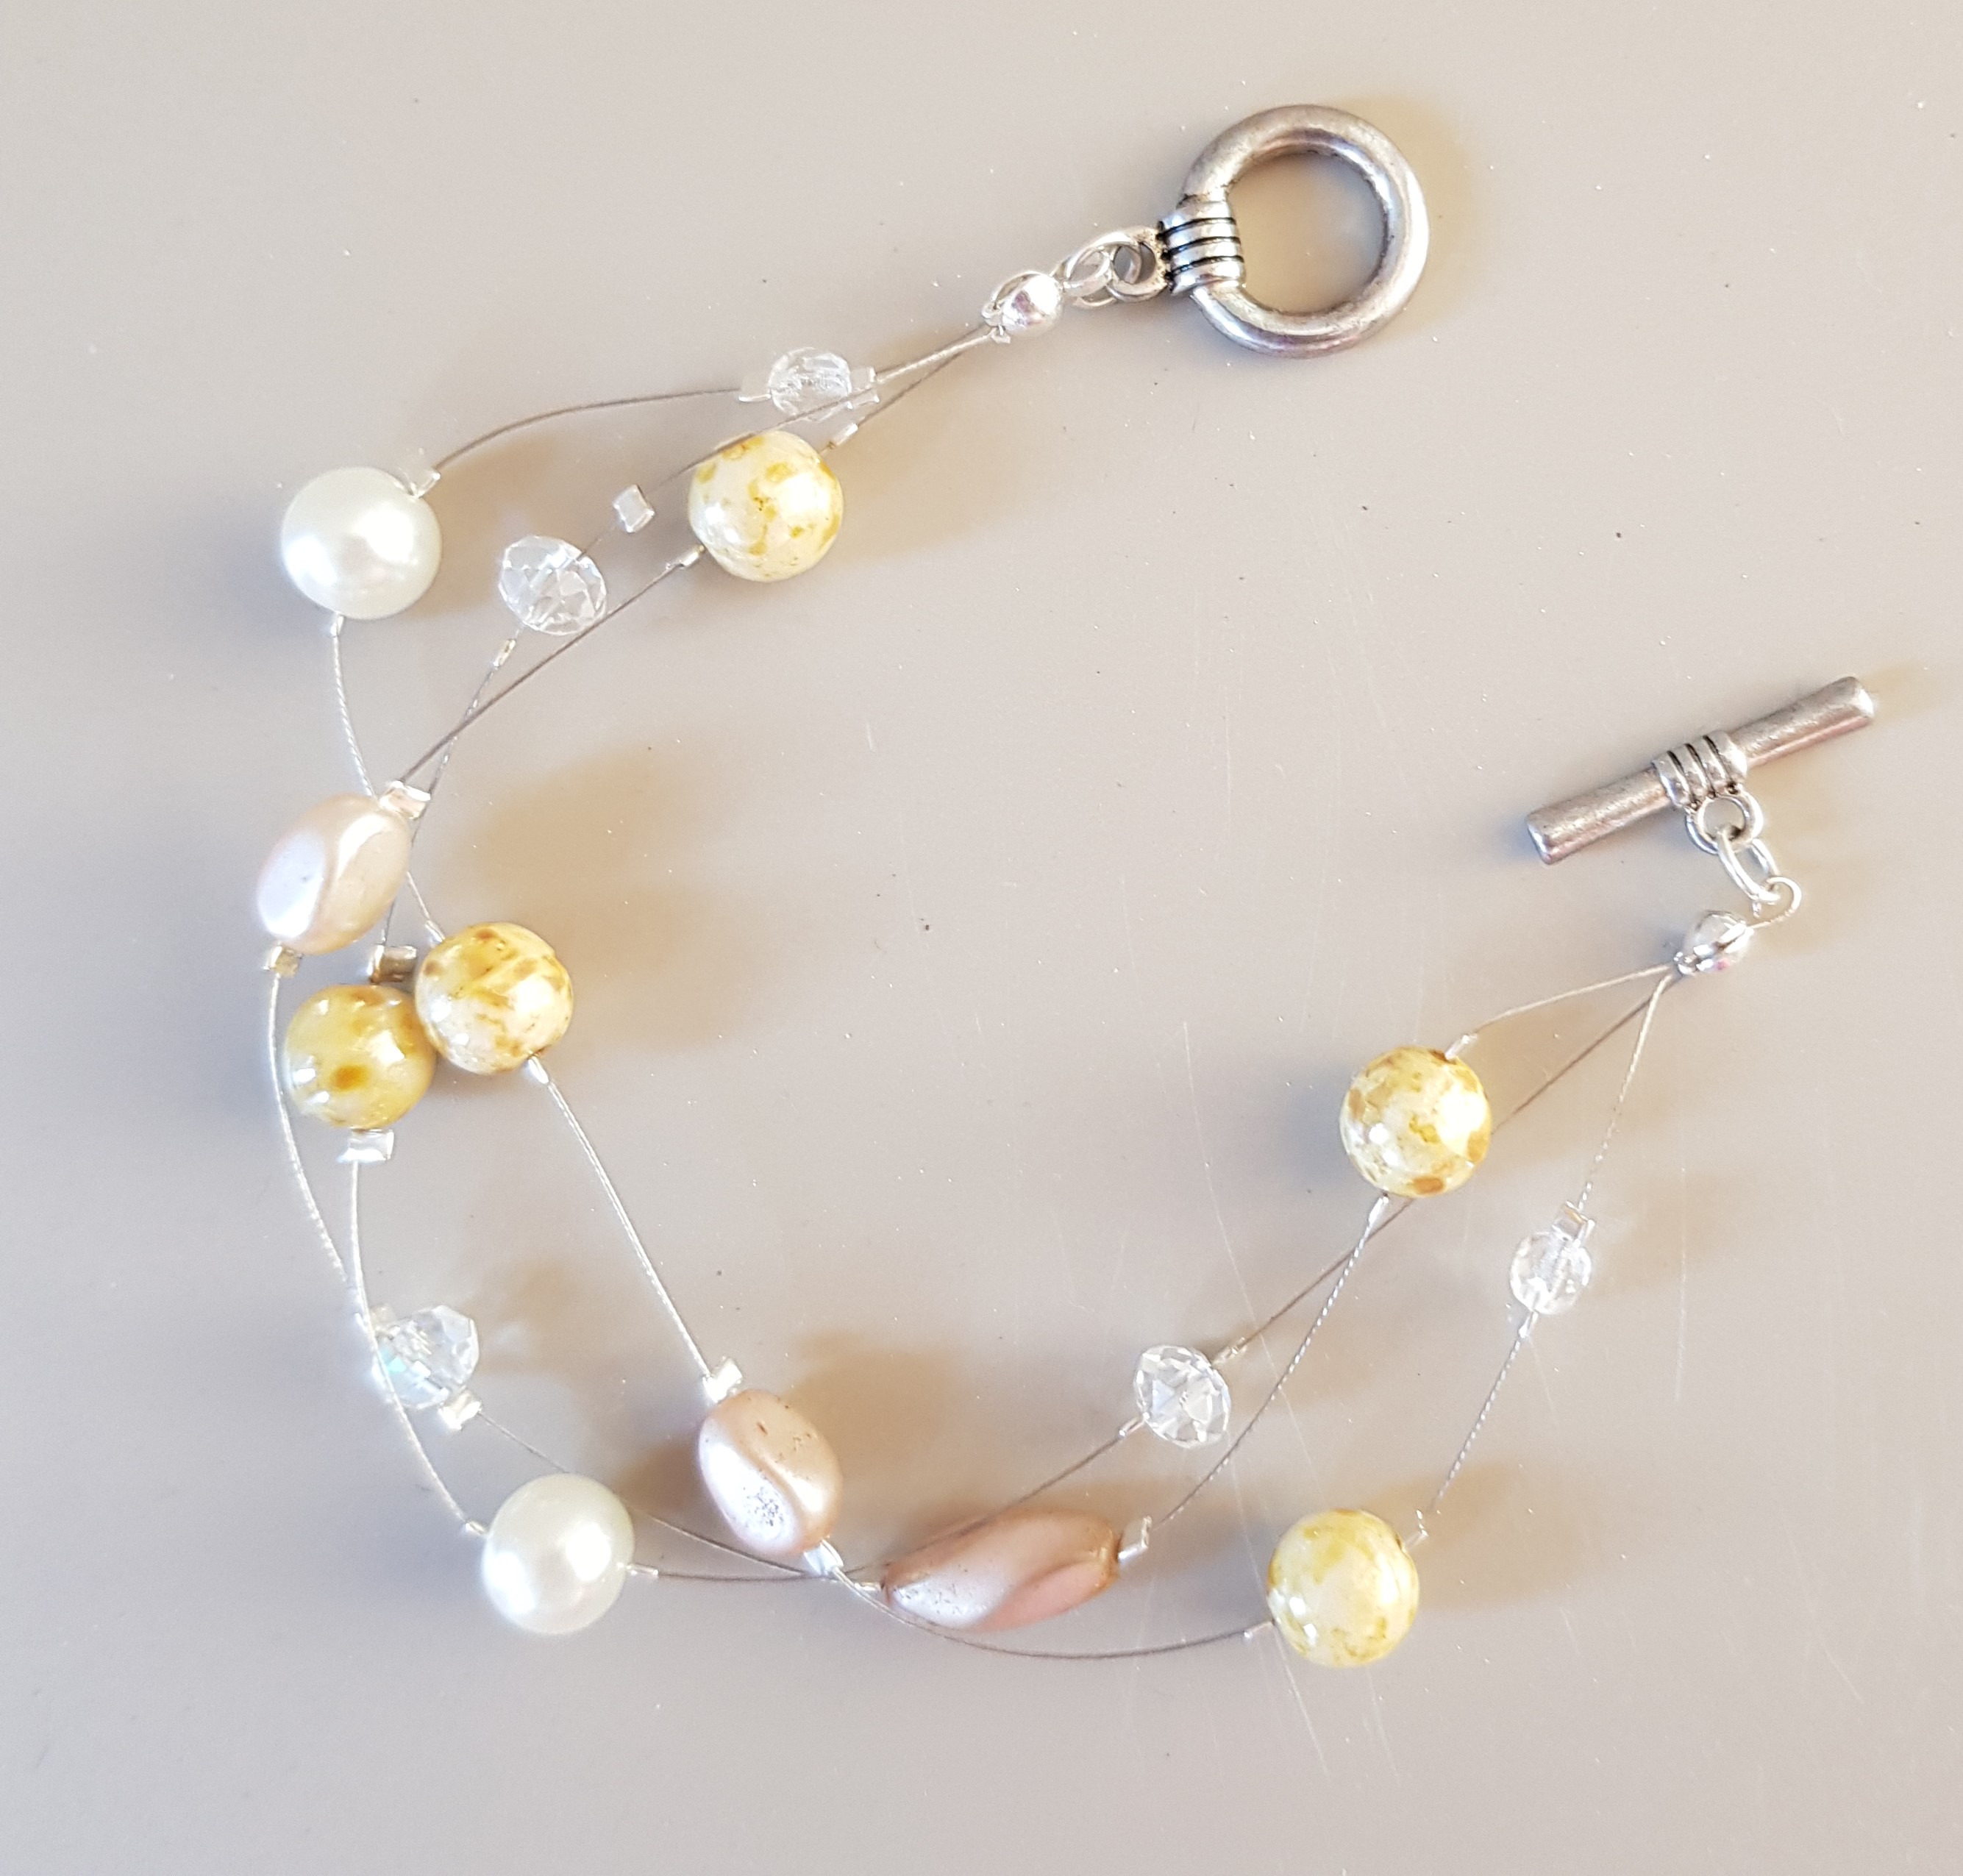 Make your own Silver Beaded Necklace